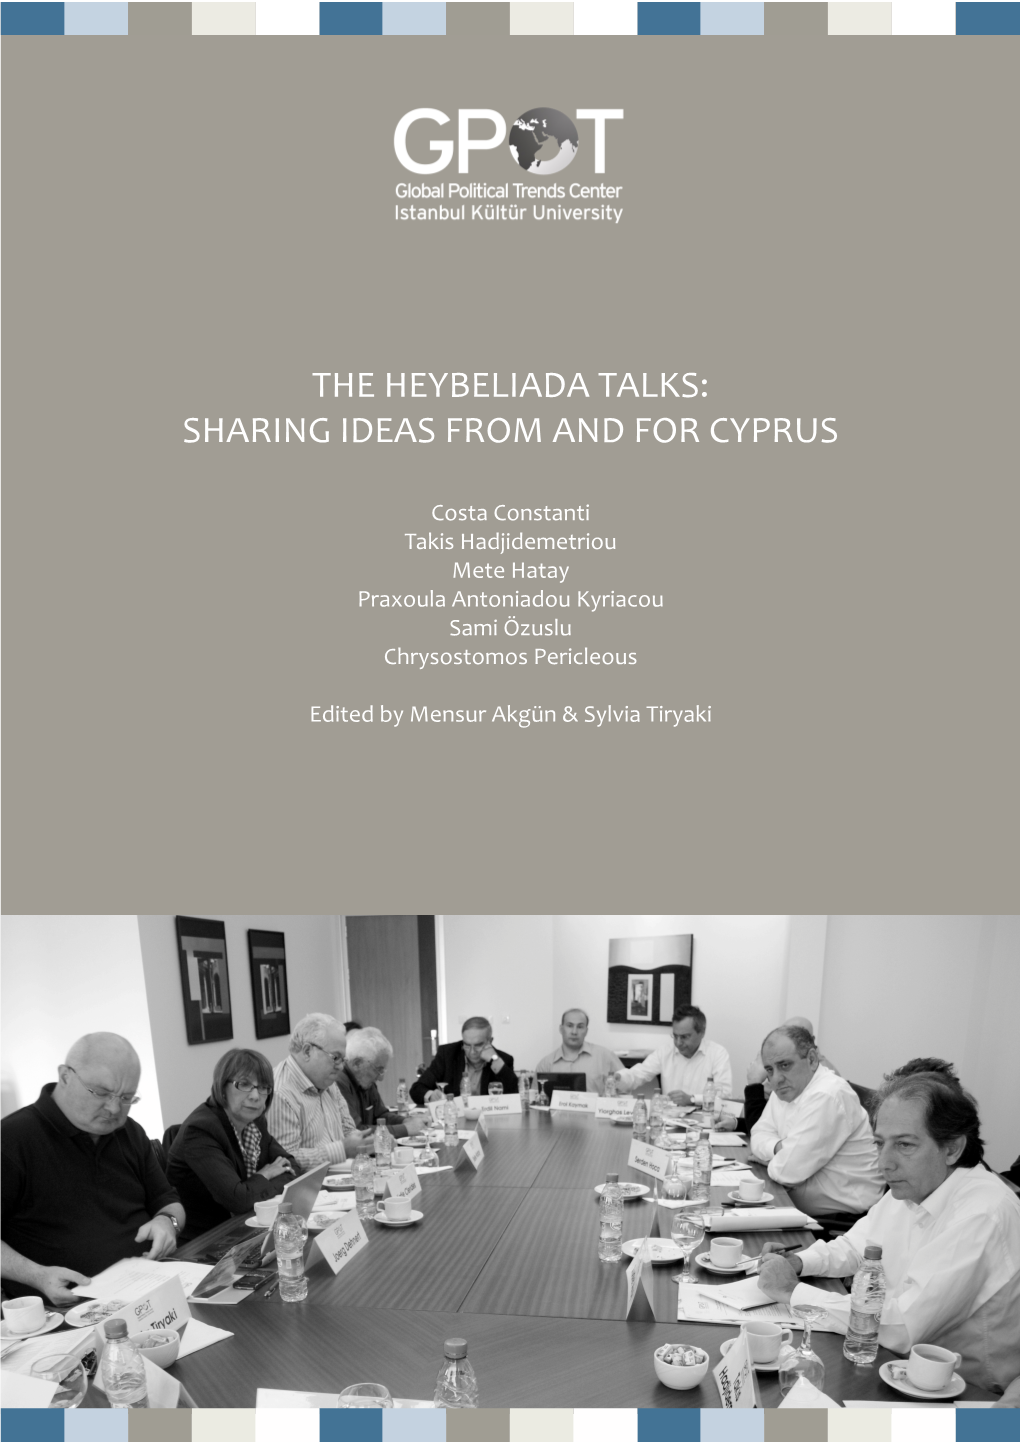 The Heybeliada Talks: Sharing Ideas from and for Cyprus